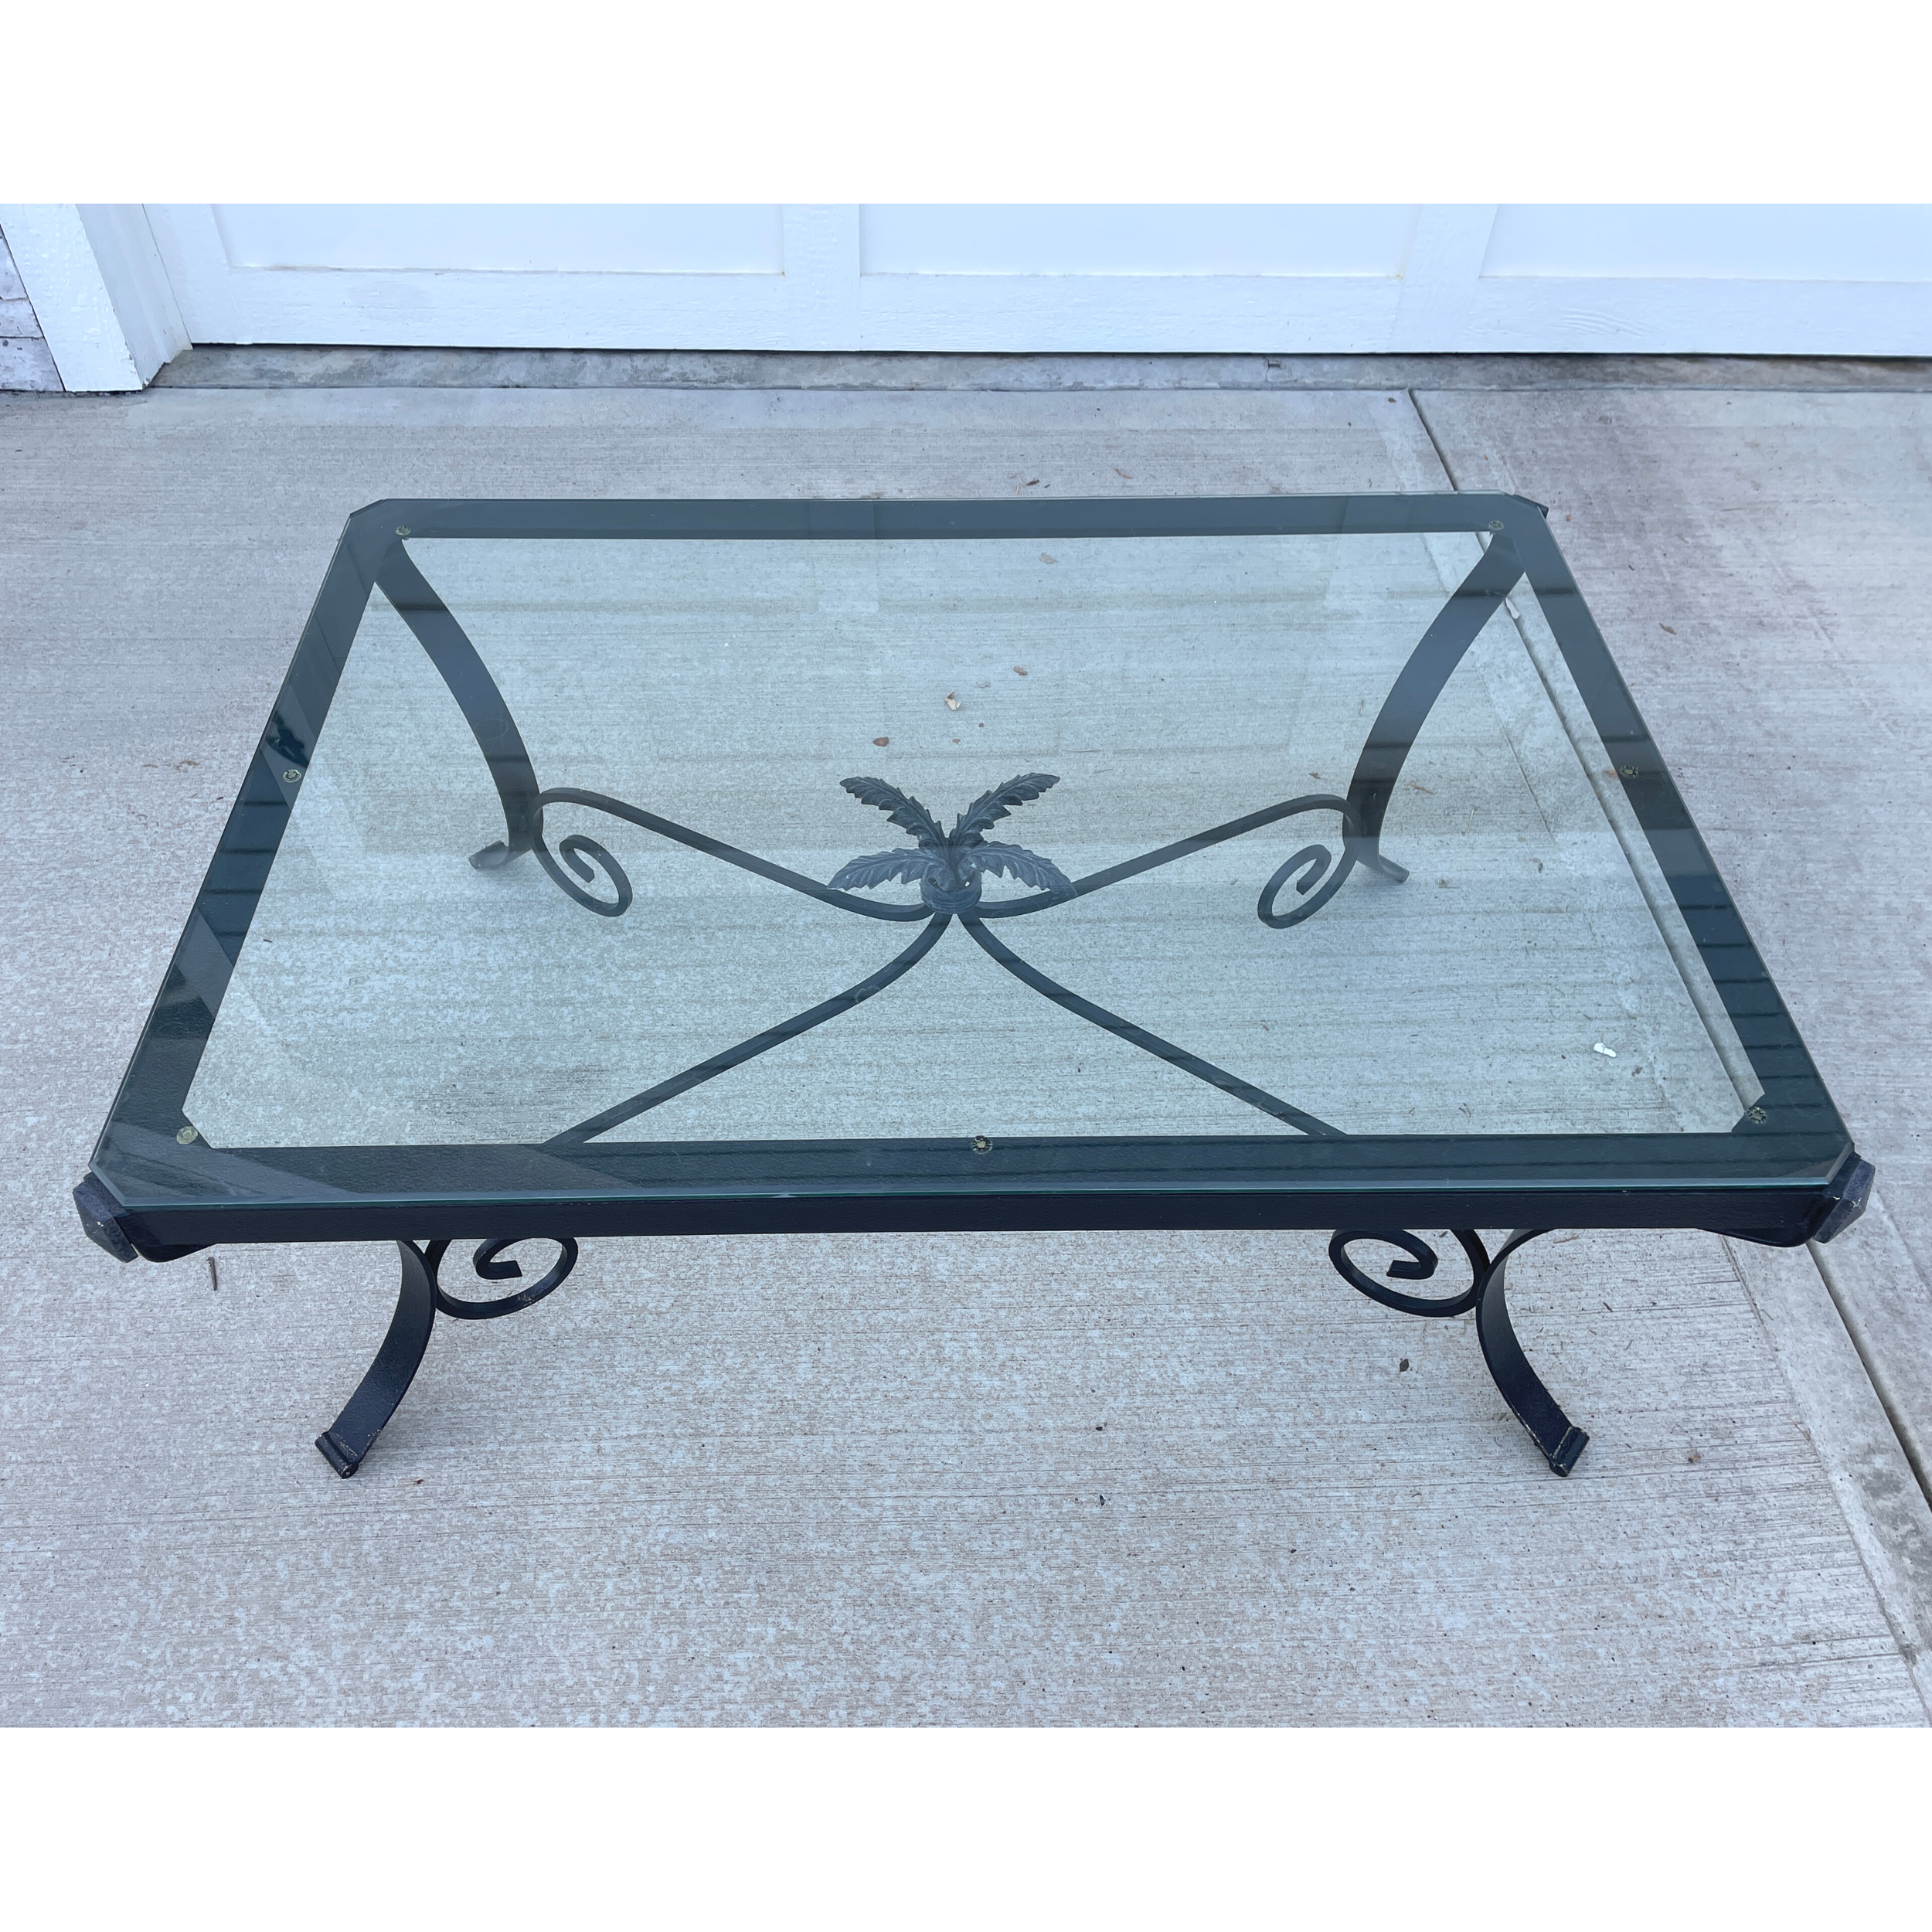 Large Glass Coffee Table